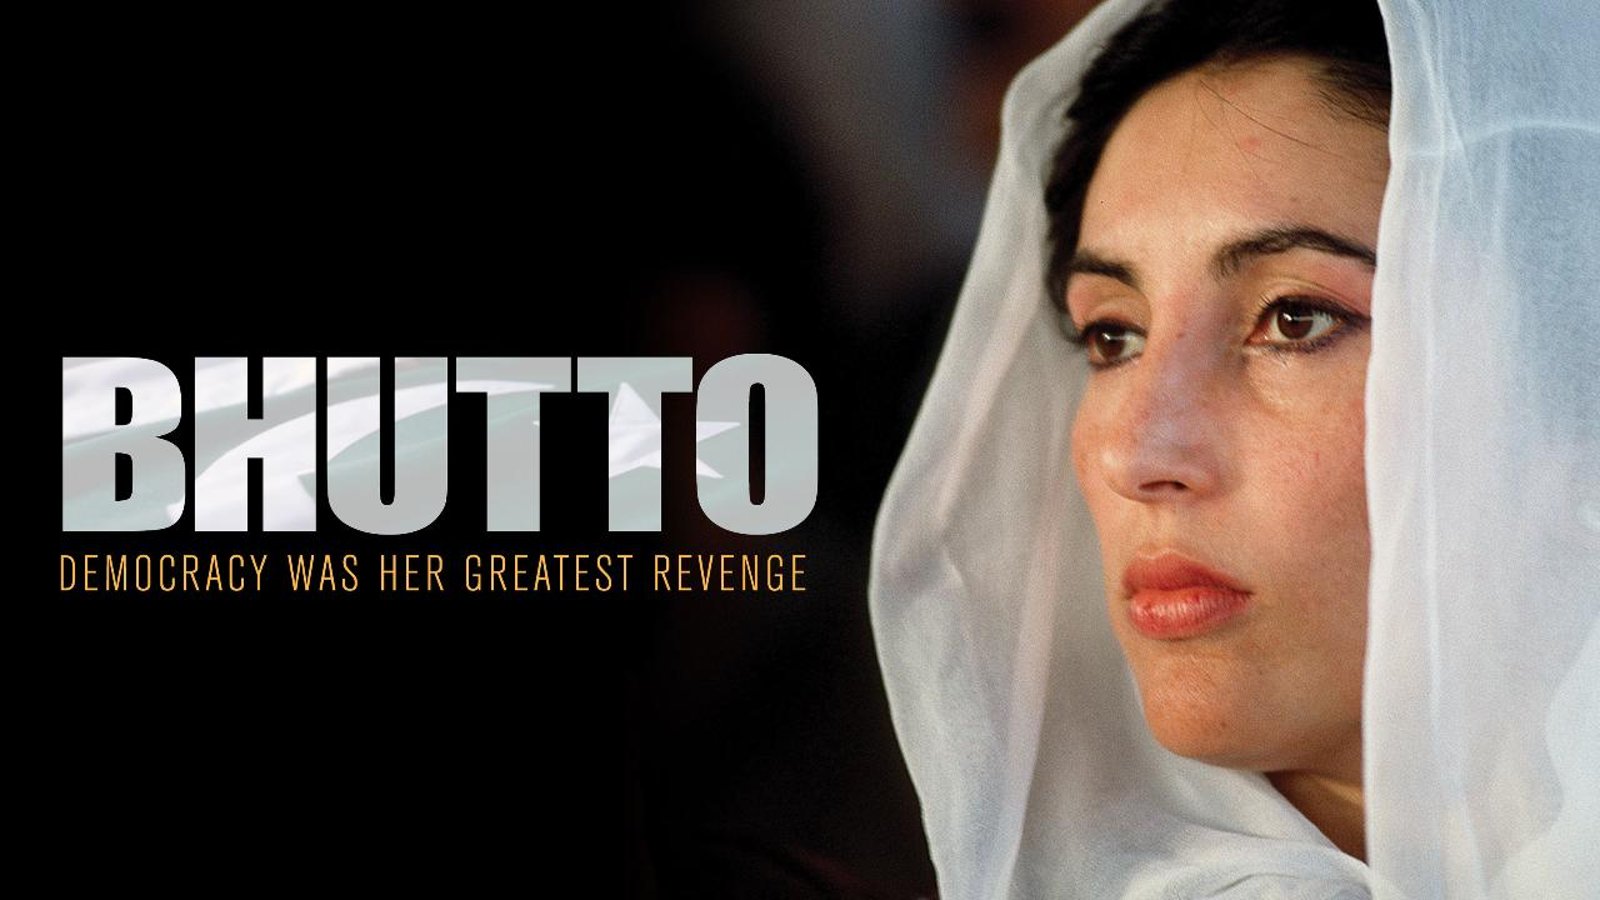 Bhutto - Democracy Was Her Greatest Revenge Against Extremism